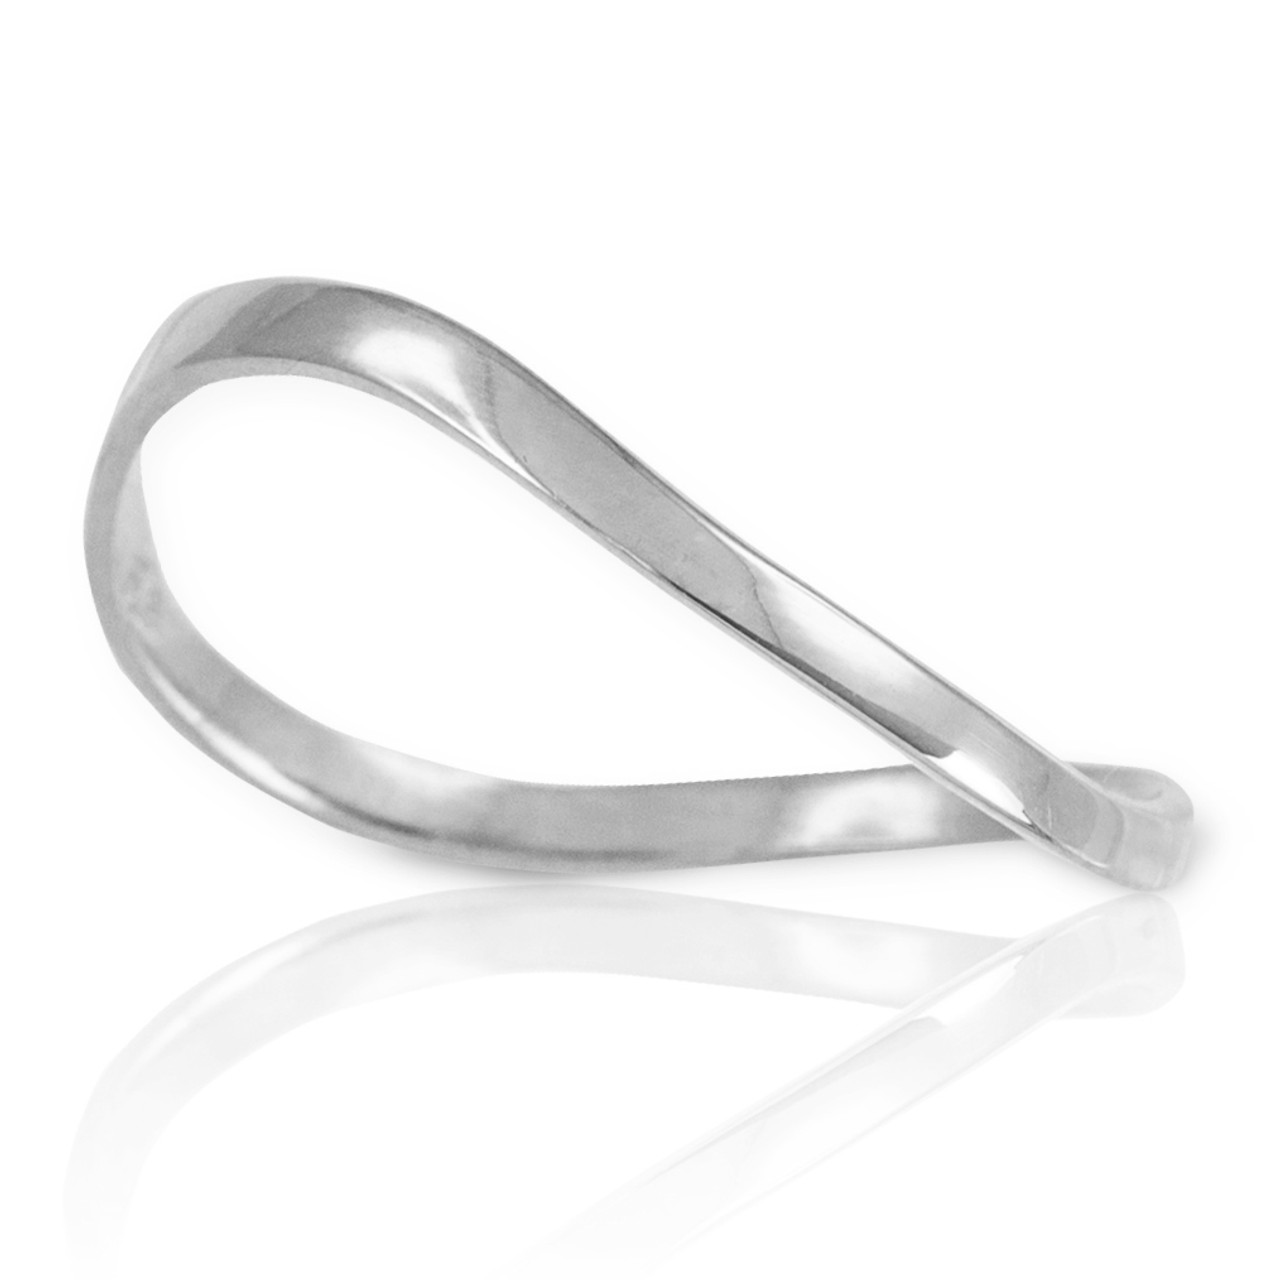 Sterling silver adjustable thumb ring or finger ring – NiciArt